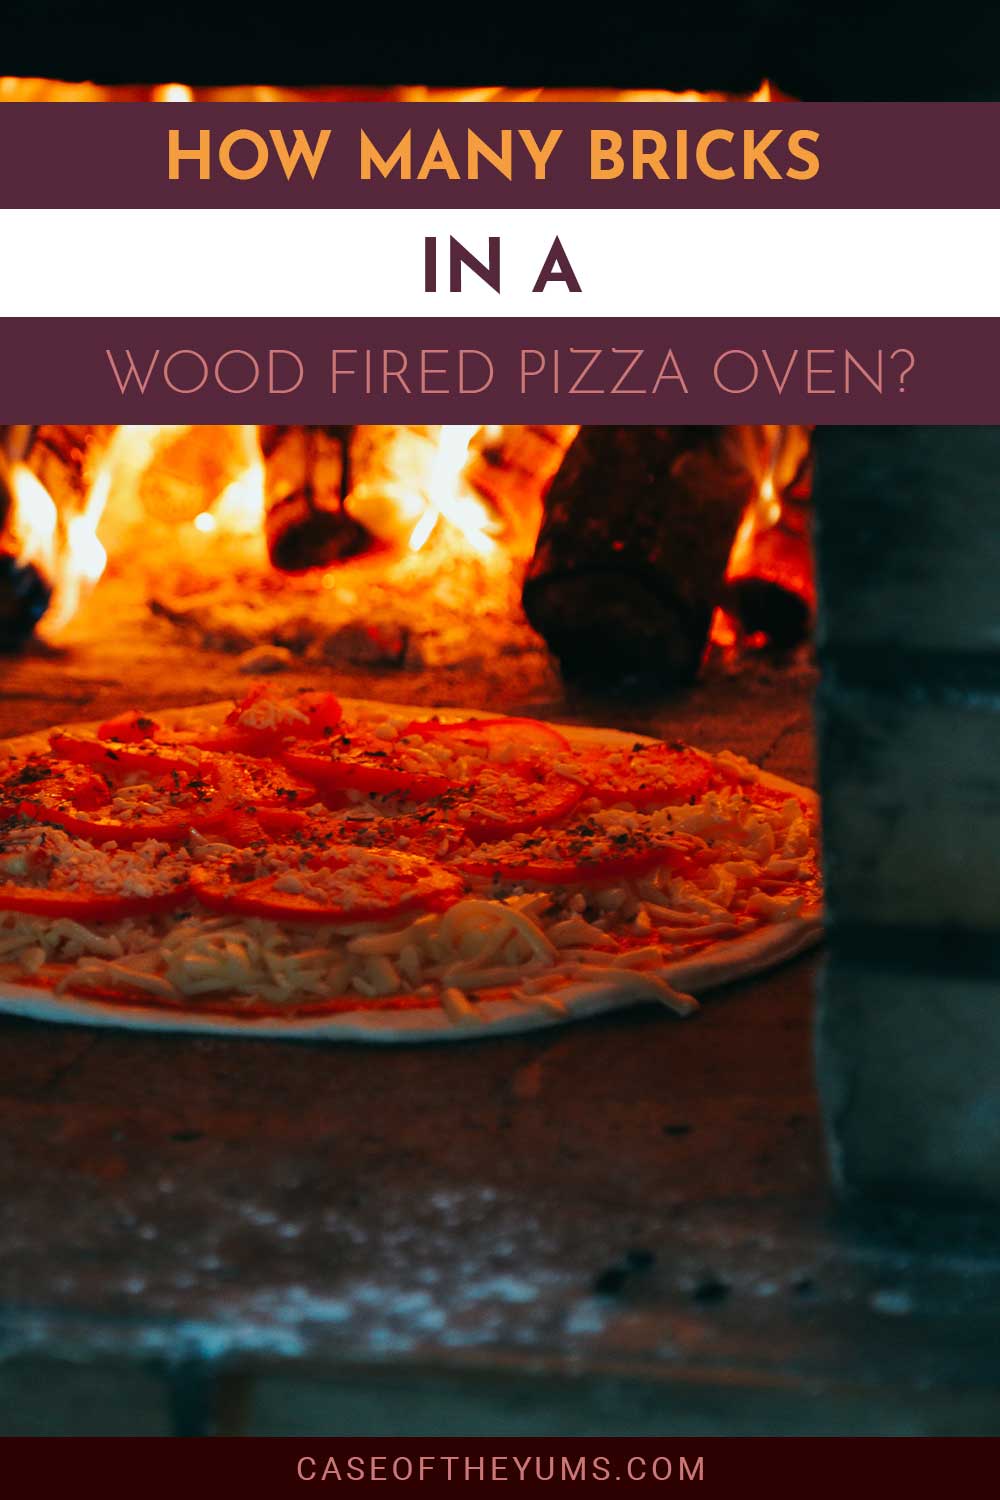 A pizza in front of burning woods in an oven - How Many Bricks in a Wood Fired Pizza Oven?